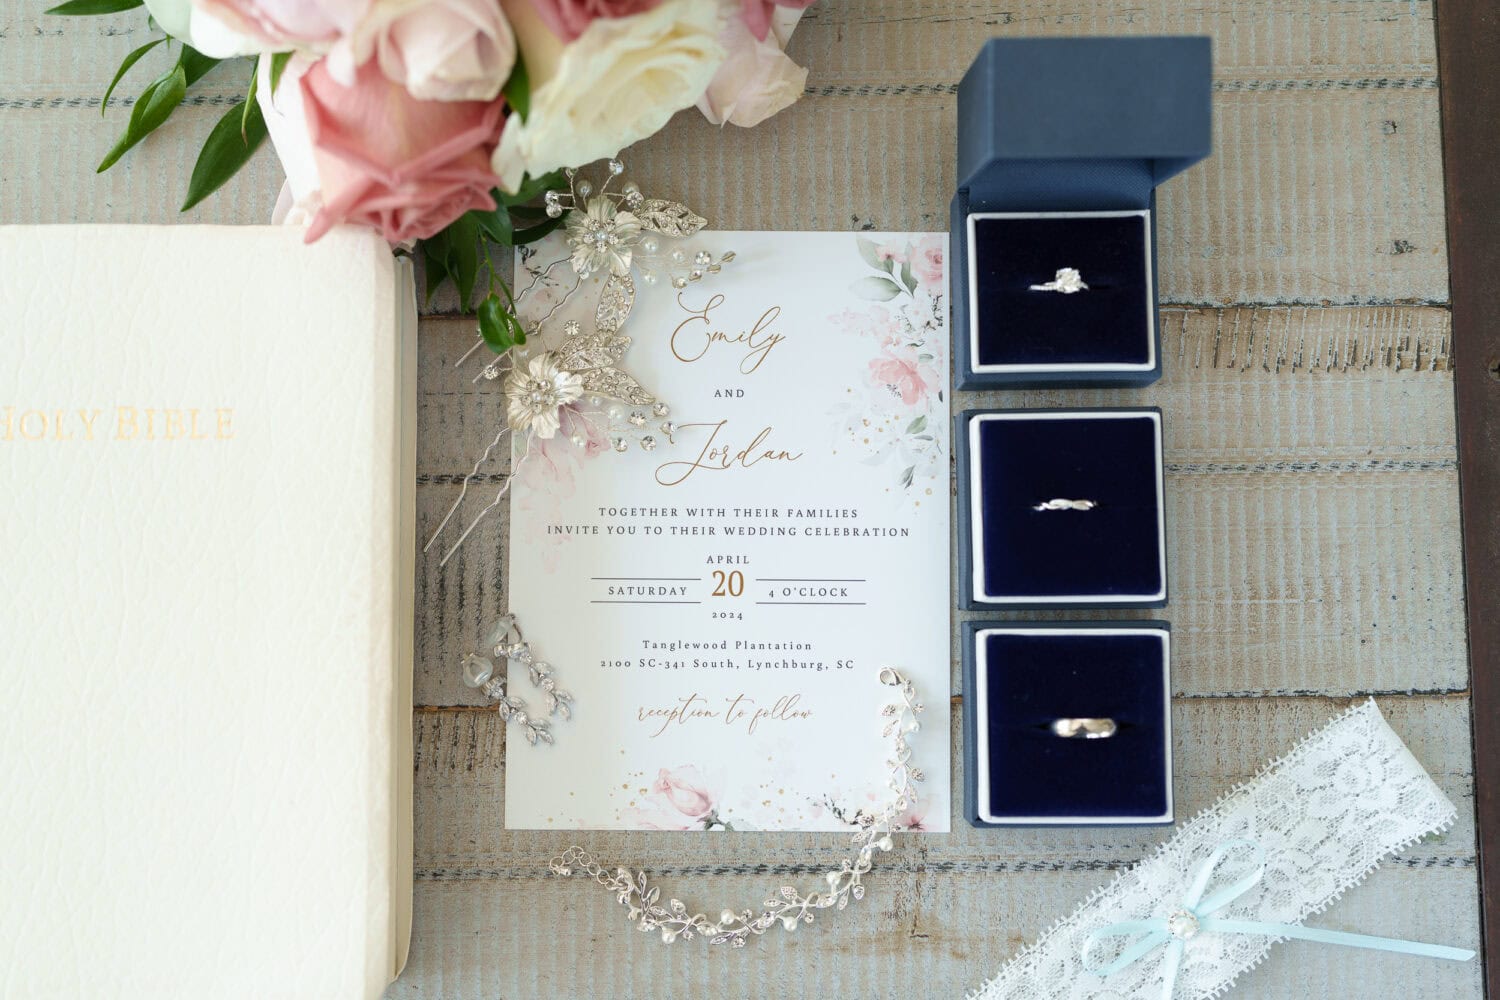 Invitation and rings details - Tanglewood Plantation